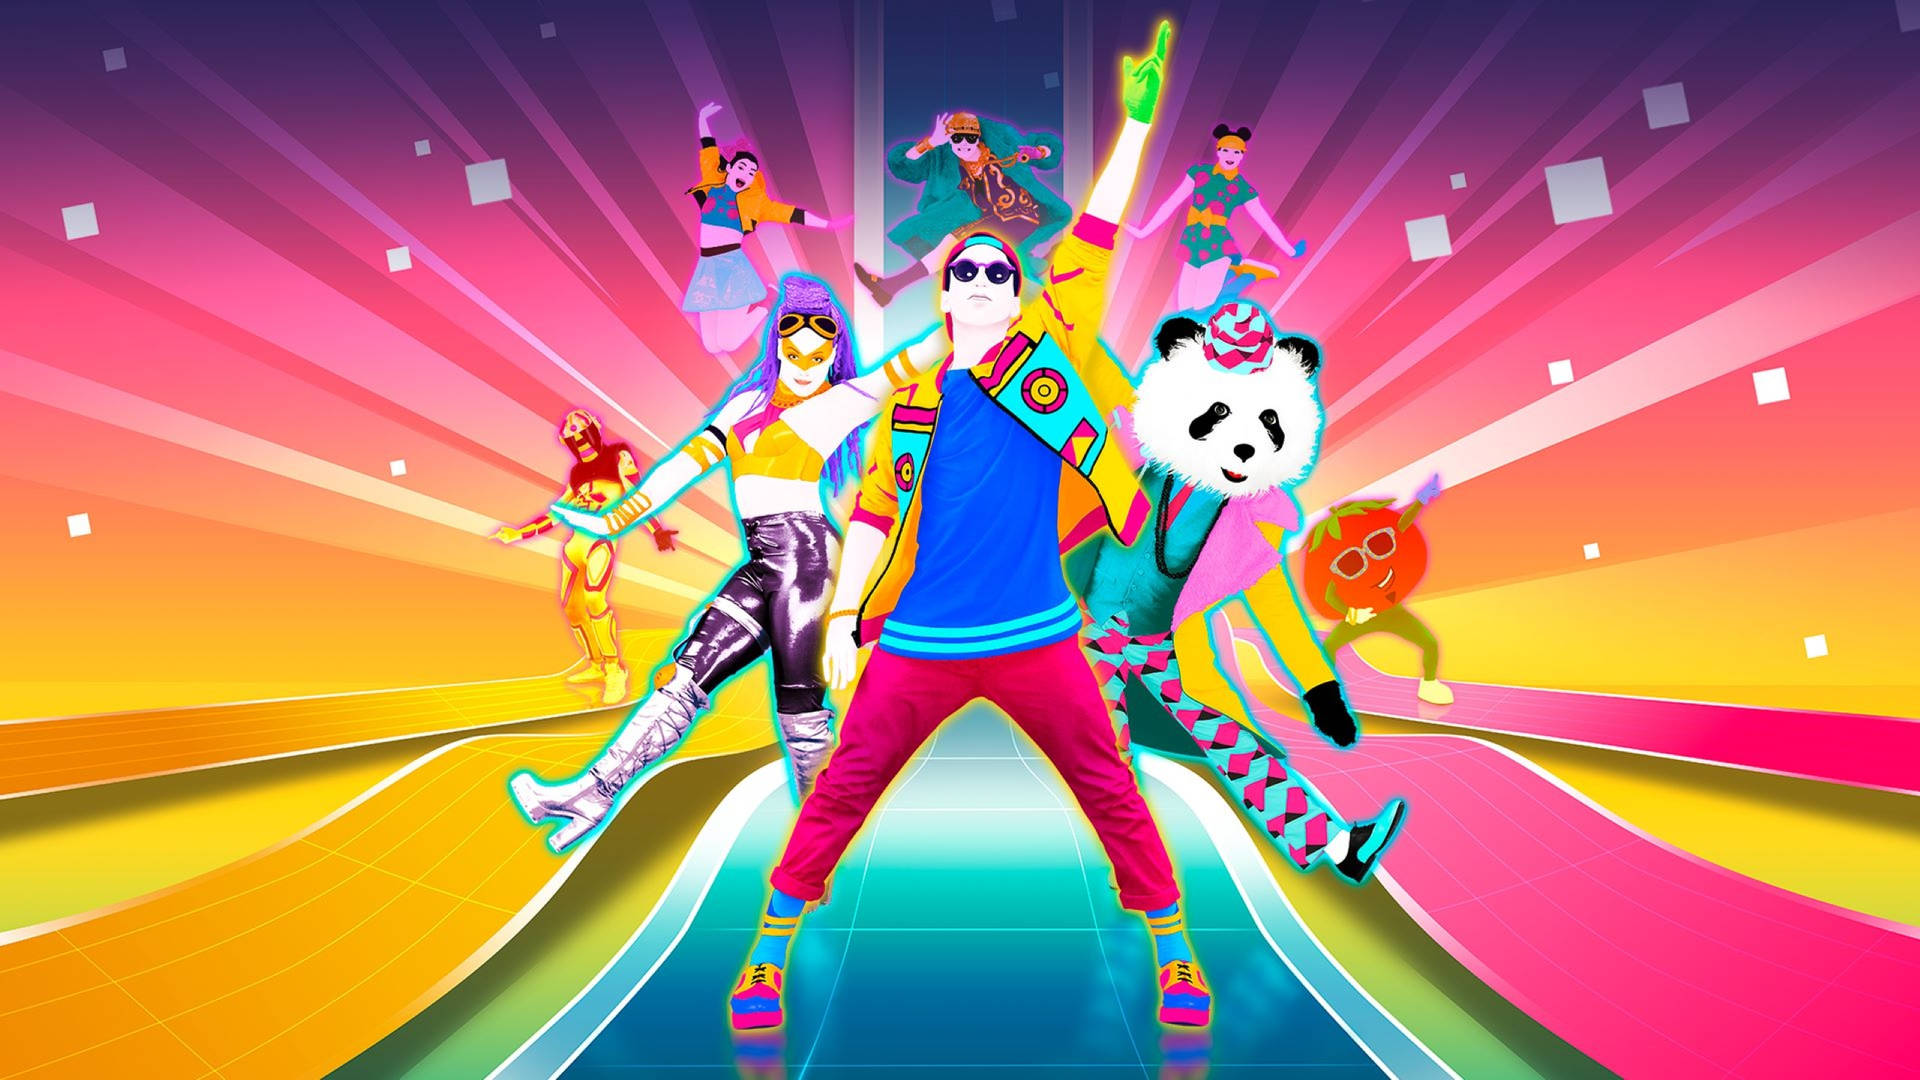 Just Dance Colorful Art Background